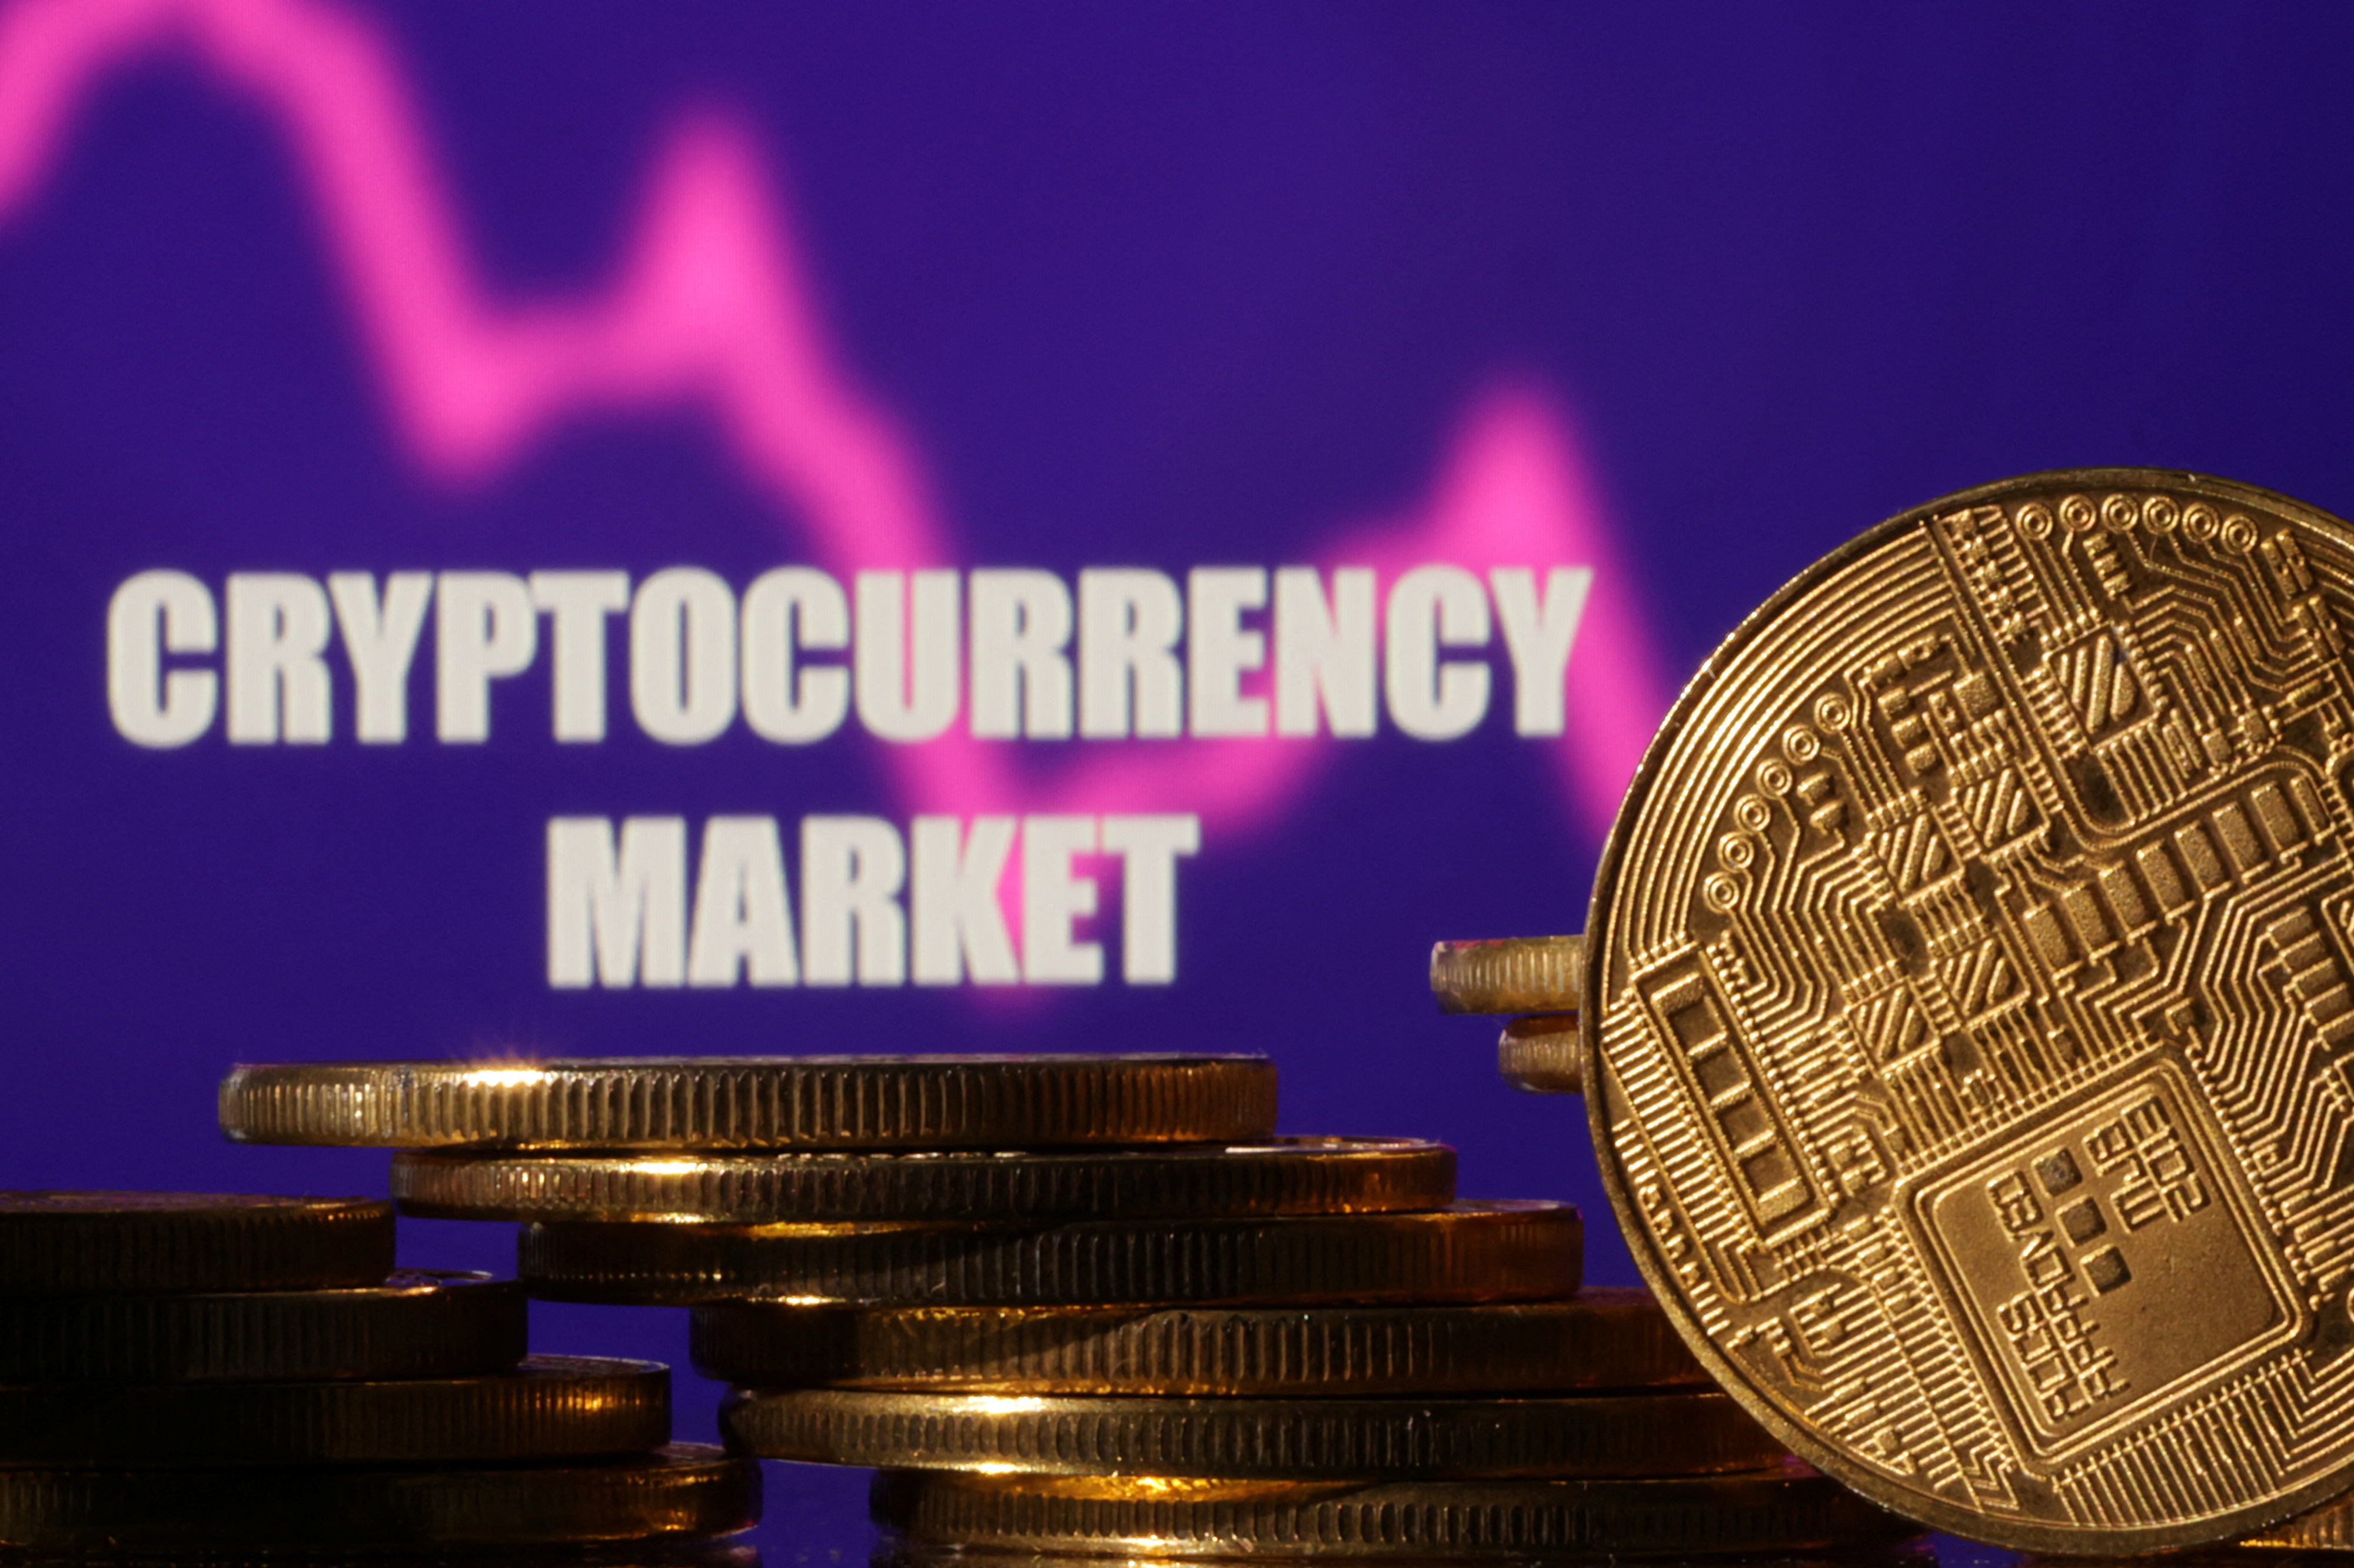 Illustration shows words "Cryptocurrency market", stock graph and representation of cryptocurrencies